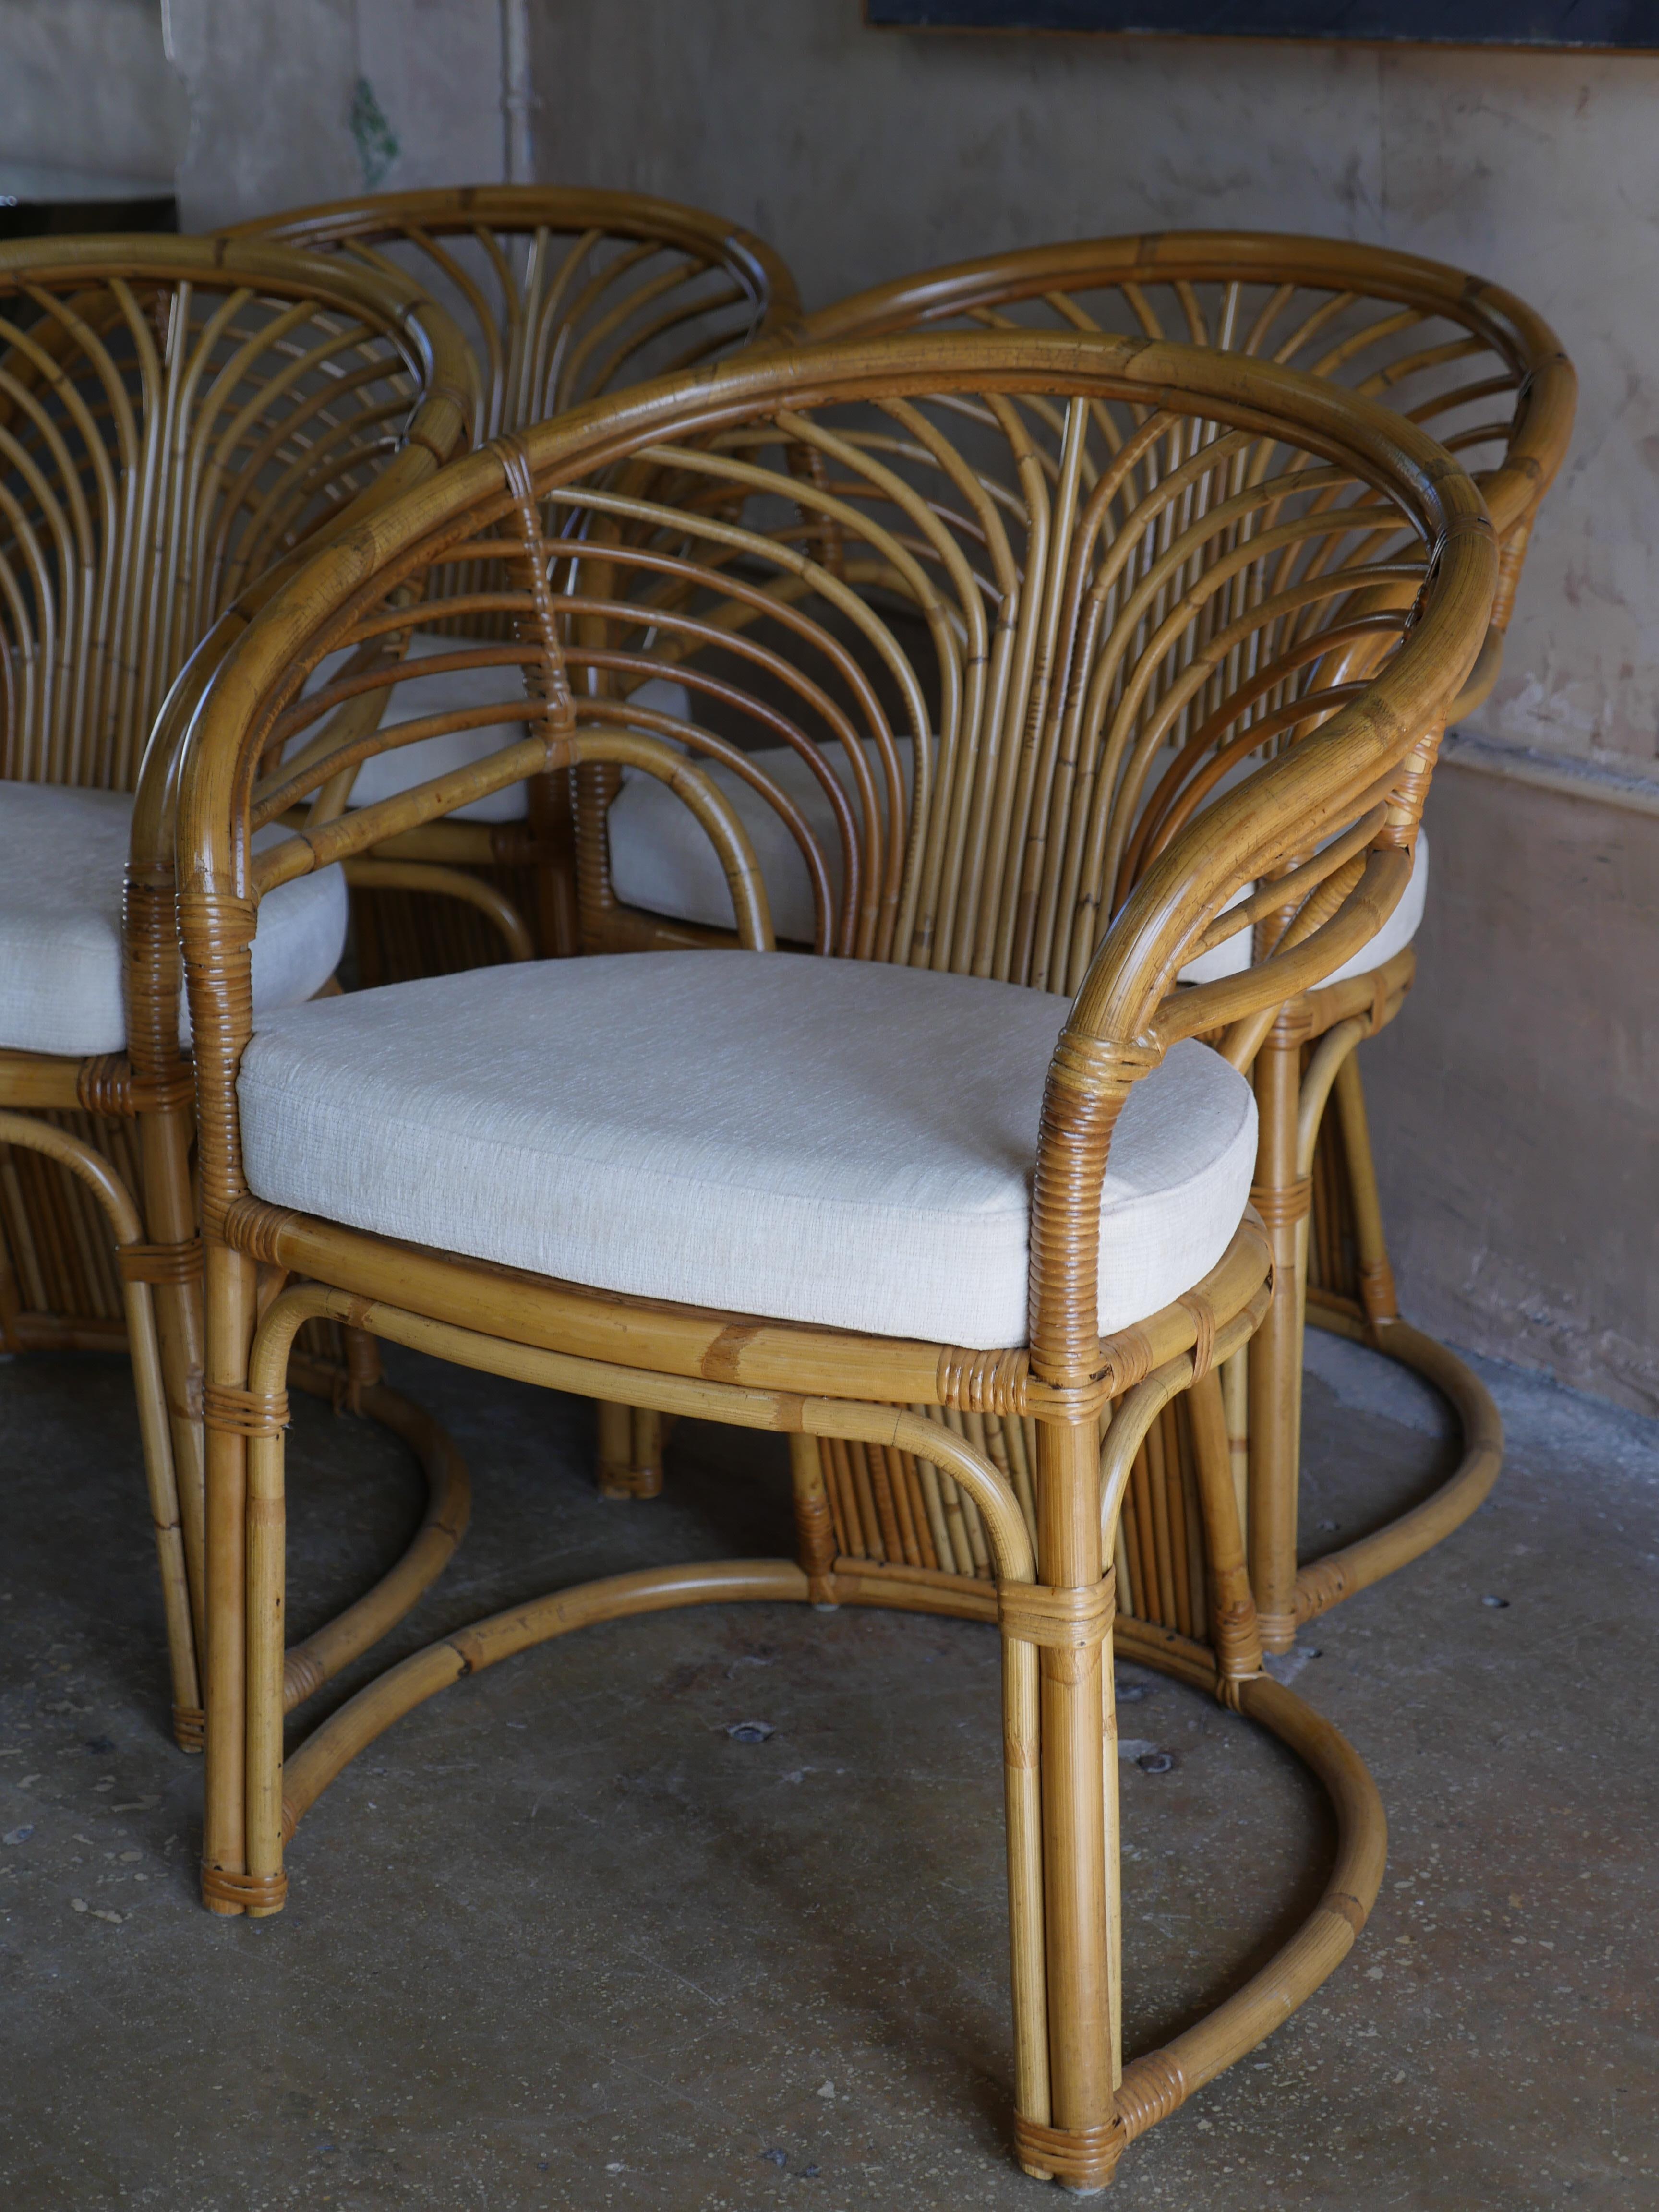 Late 20th Century 1980s Coastal Rattan Dining Chairs with Holly Hunt Chenille Fabric - Set of 4 For Sale